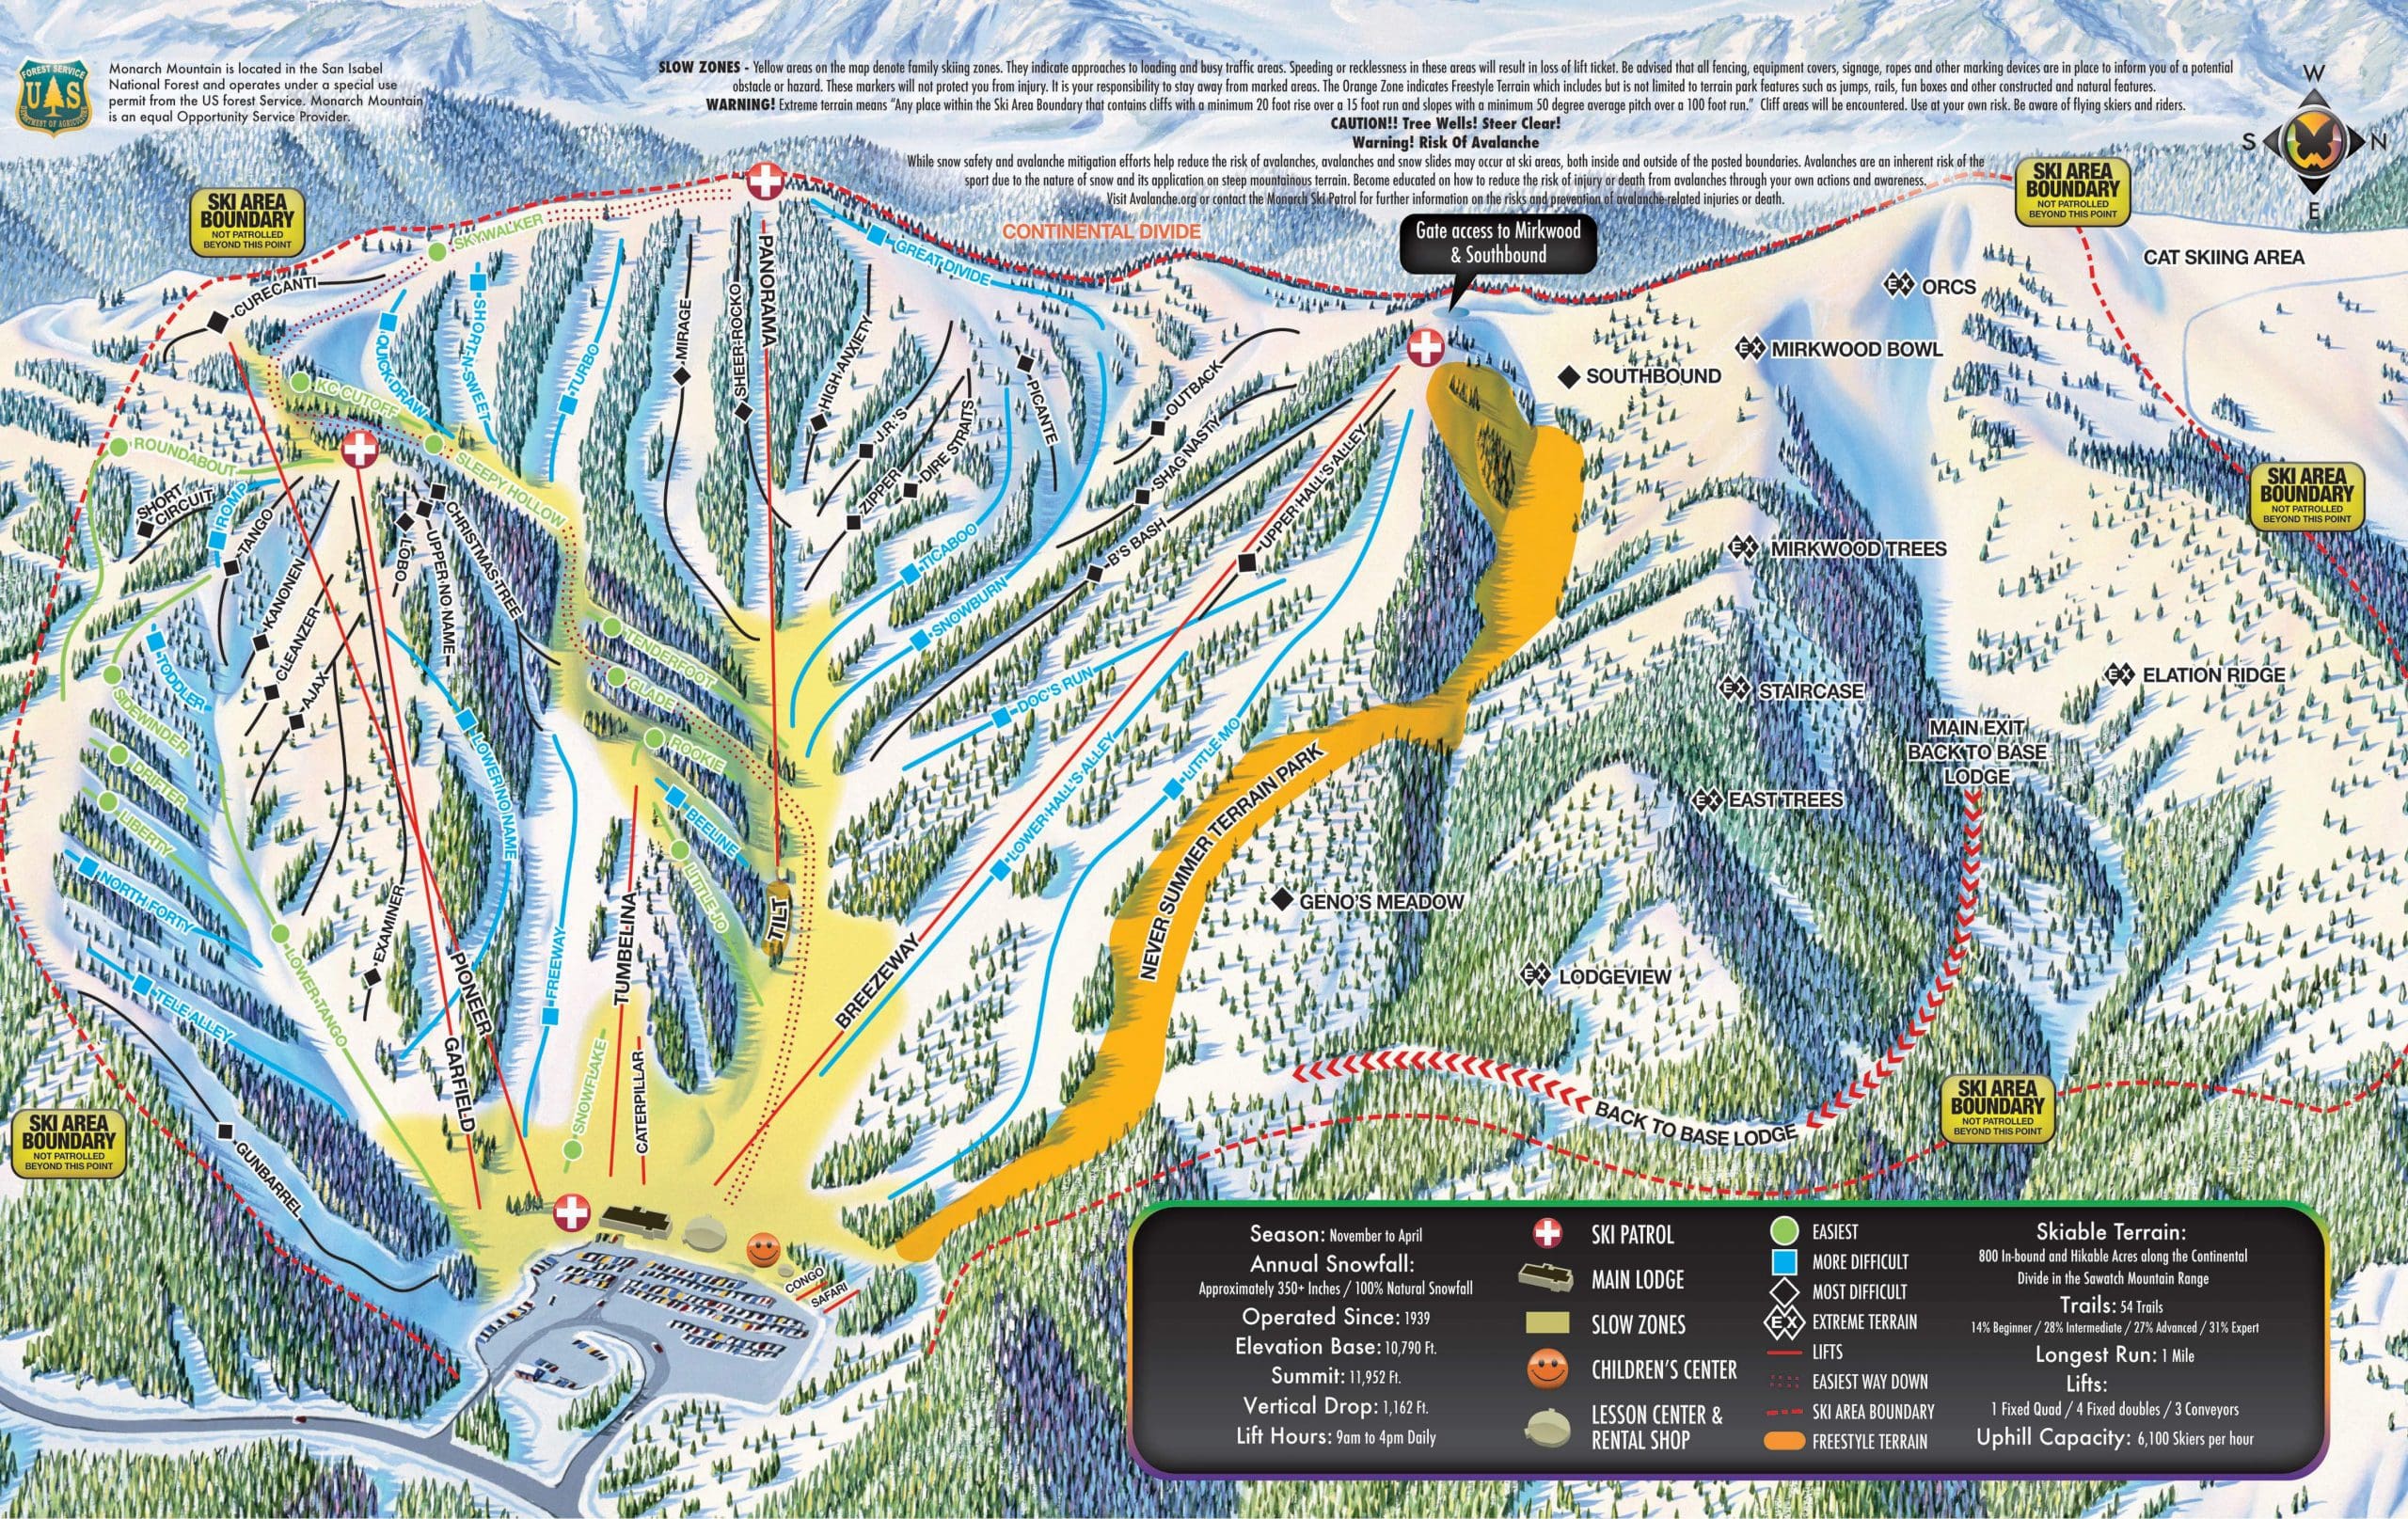 Monarch Mountain Opening Nov. 1 with 100 Natural Snow (Earliest